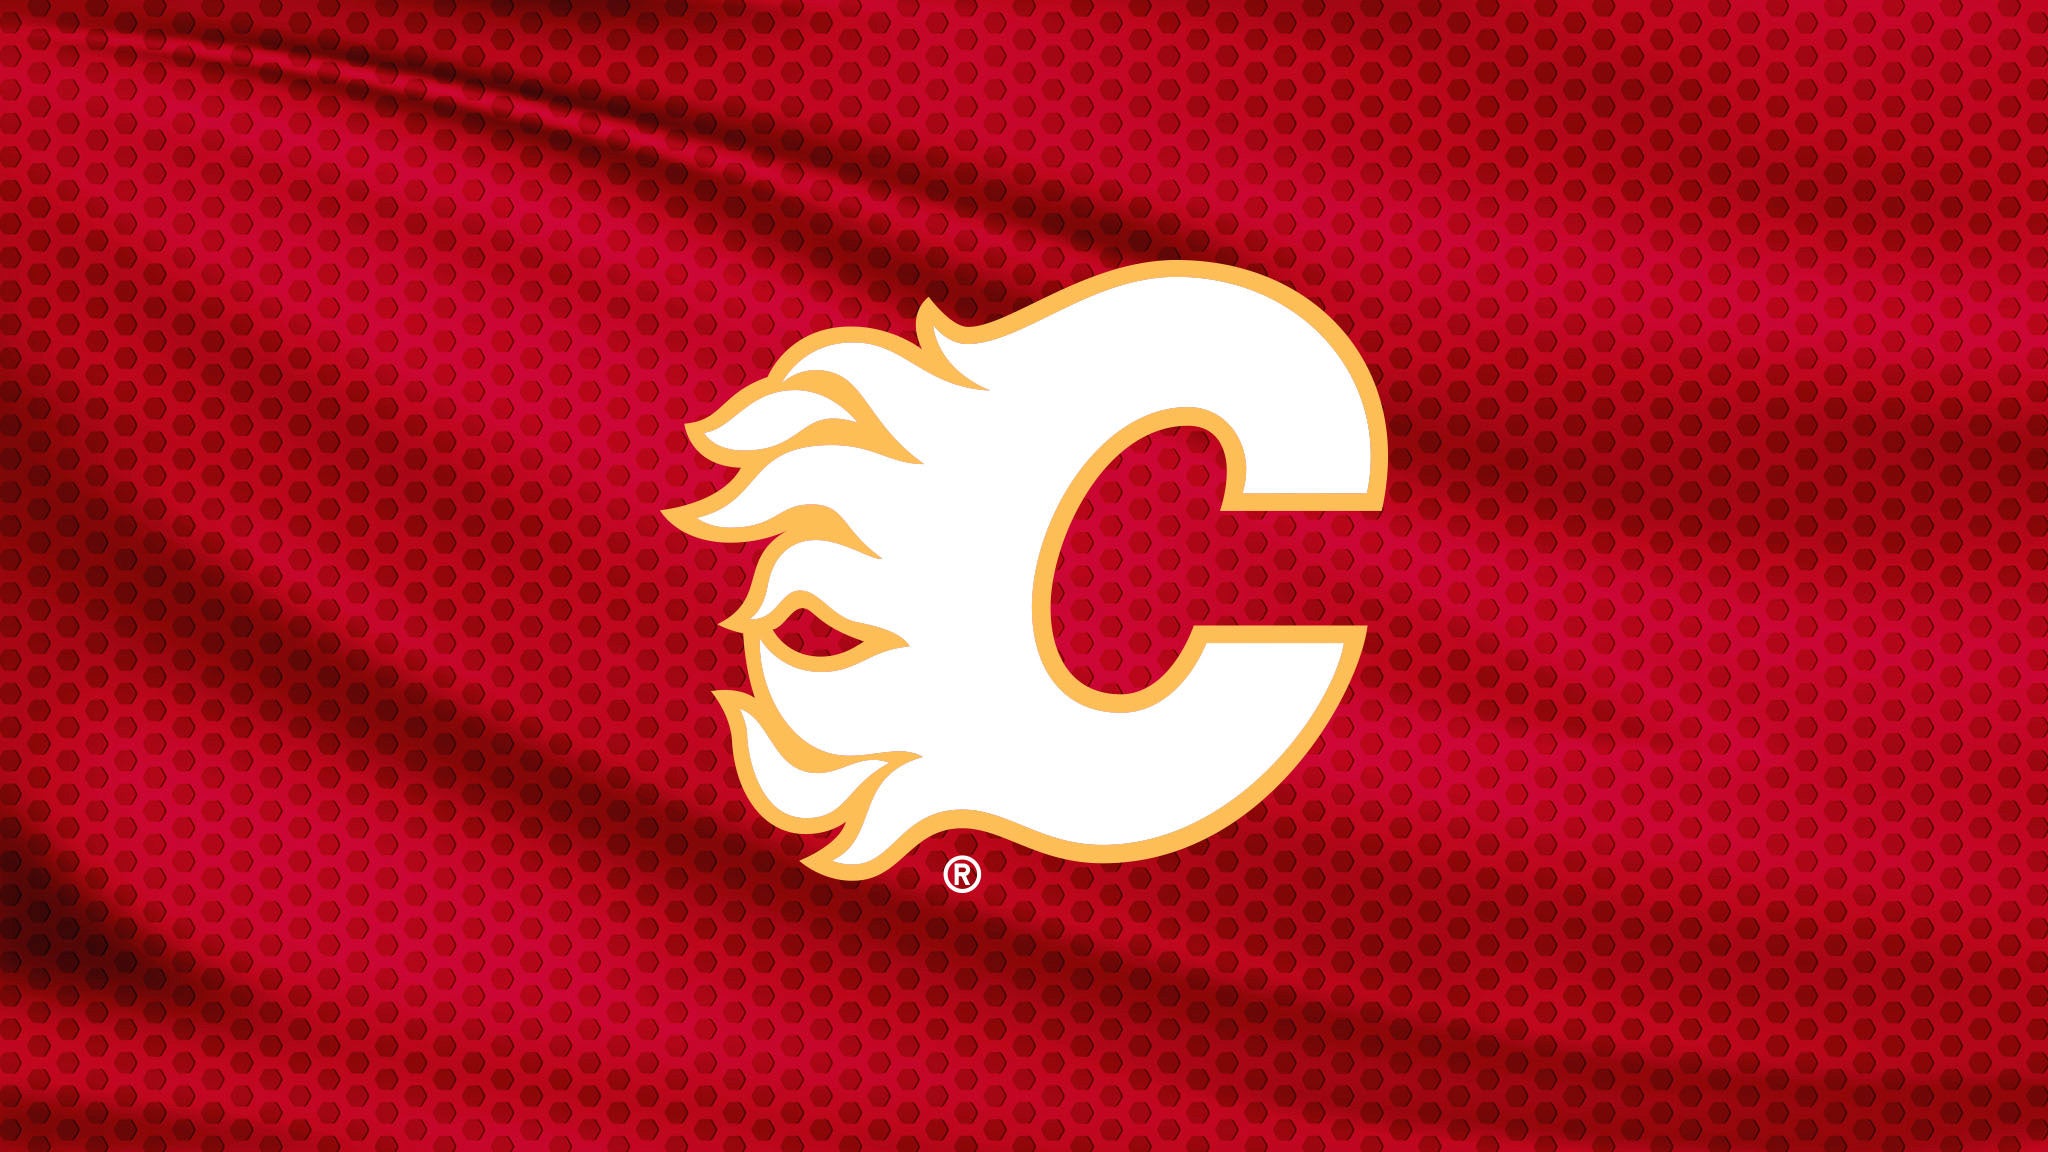 Calgary Flames vs. Anaheim Ducks in Calgary promo photo for Scratchy Tuesday presale offer code